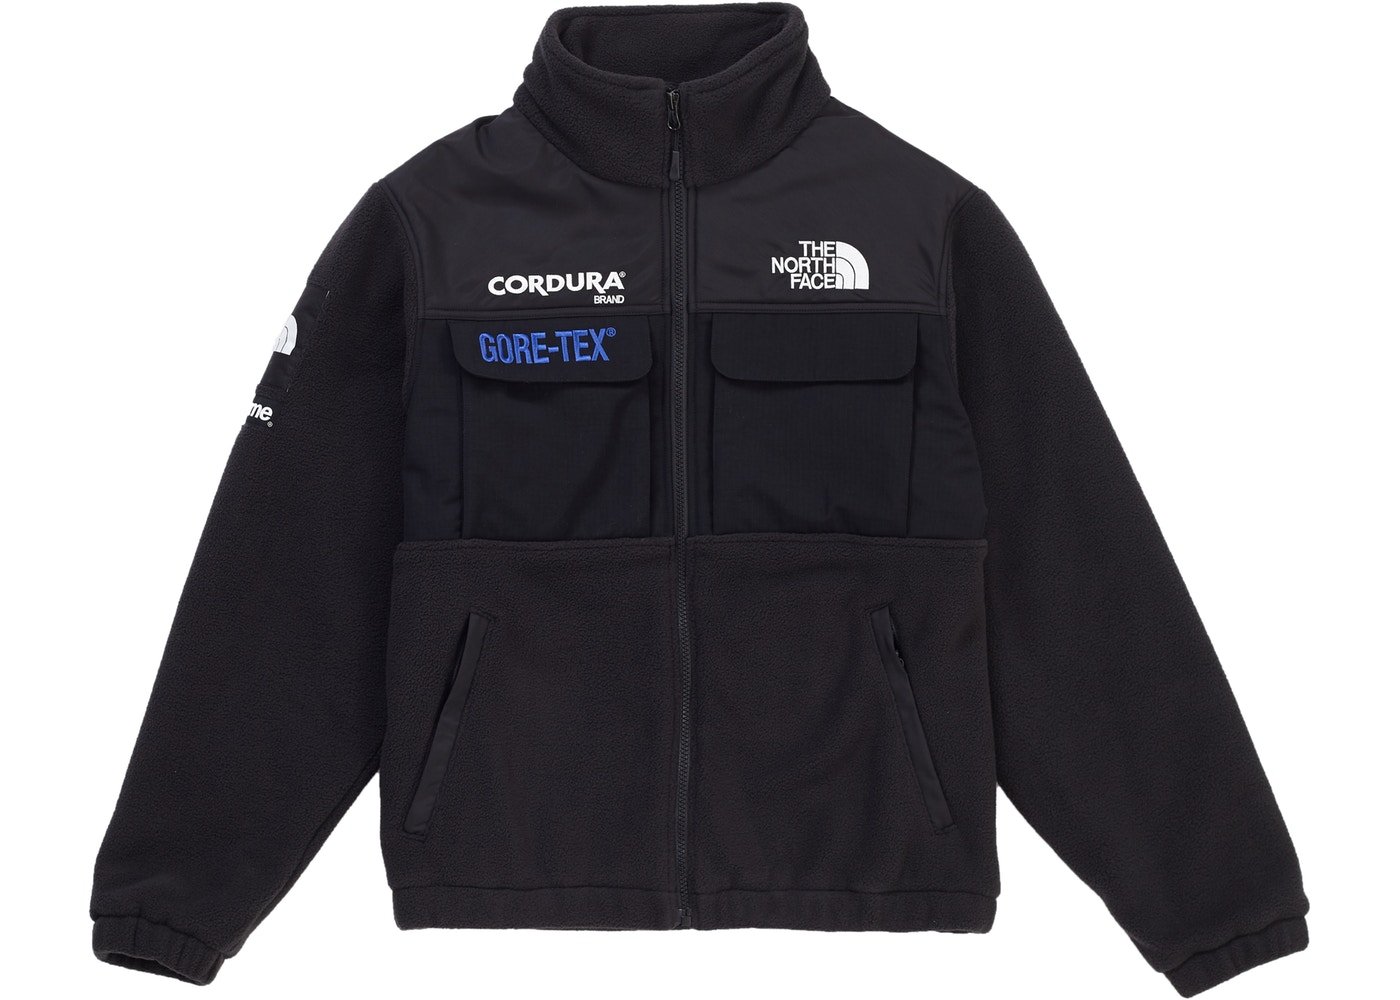 2018 Supreme The North Face Expedition Fleece Jacket 羊毛